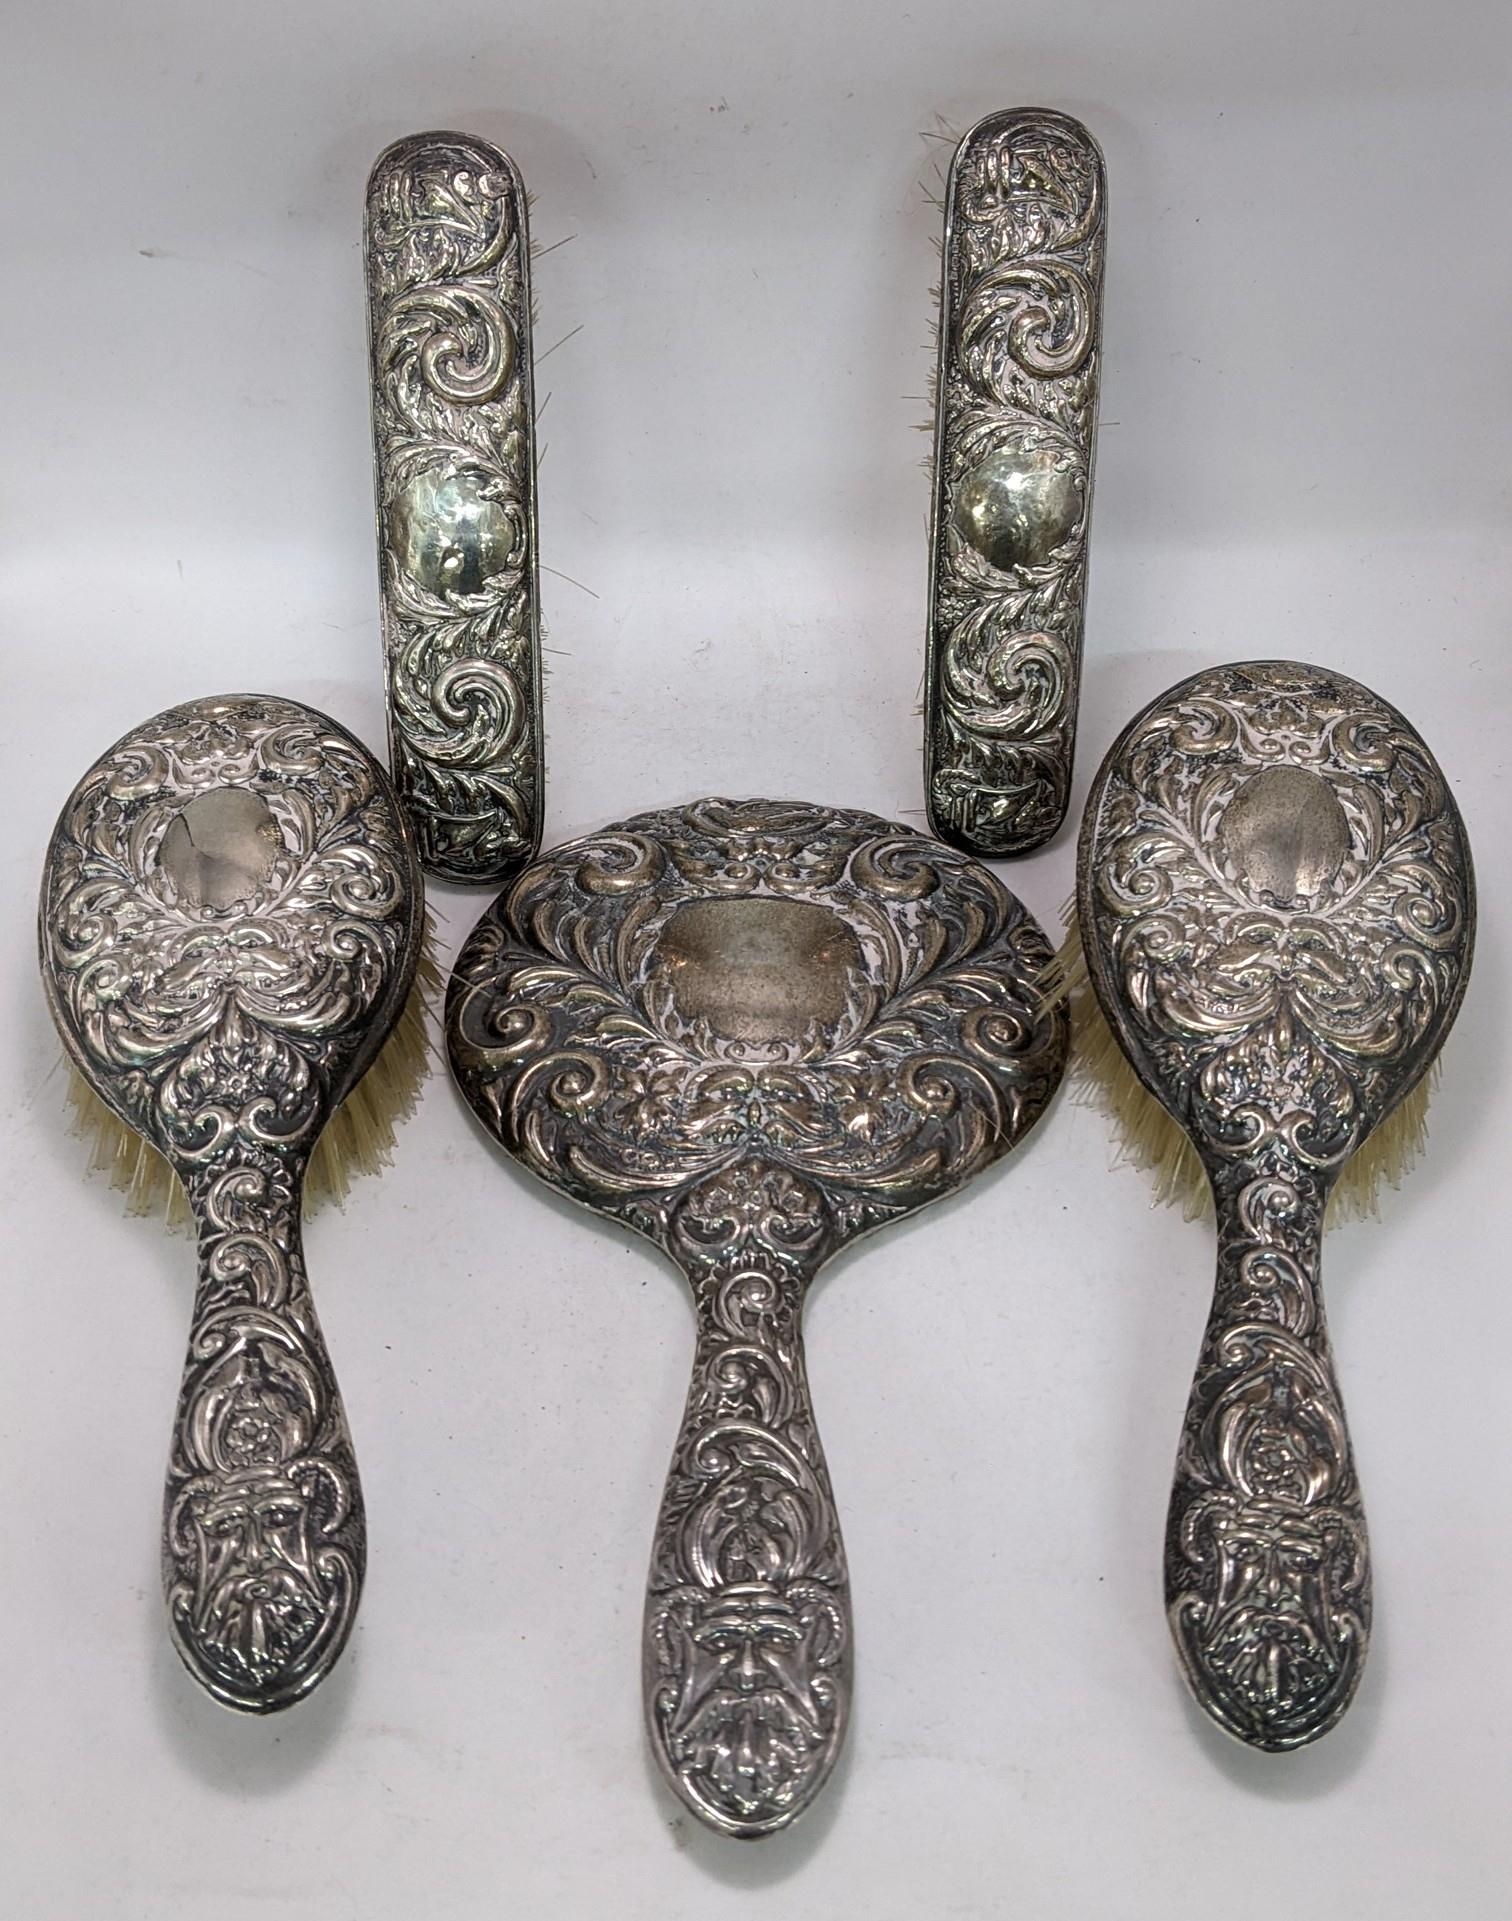 A silver backed dressing table set with an embossed decoration Location: